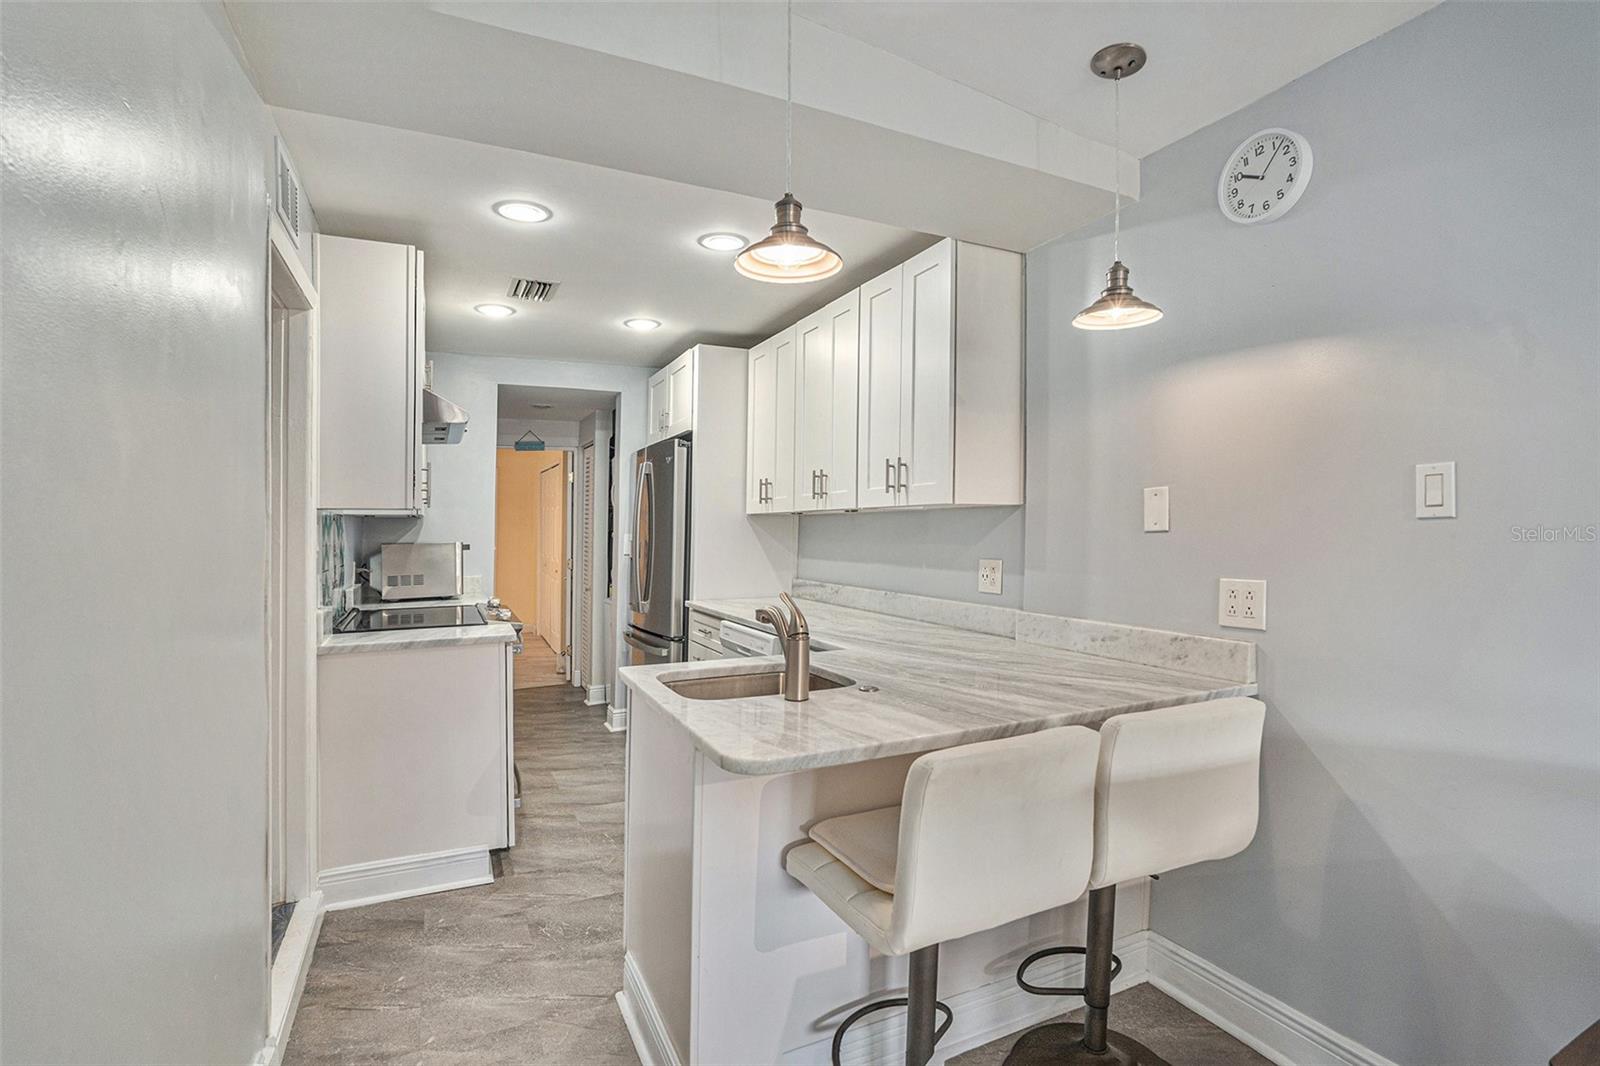 Lovely breakfast bar is chic and tastefully done with granite, stainless and beautiful cabinets with soft close features. Calm coastal themed color scheme ..do you hear the ocean calling?